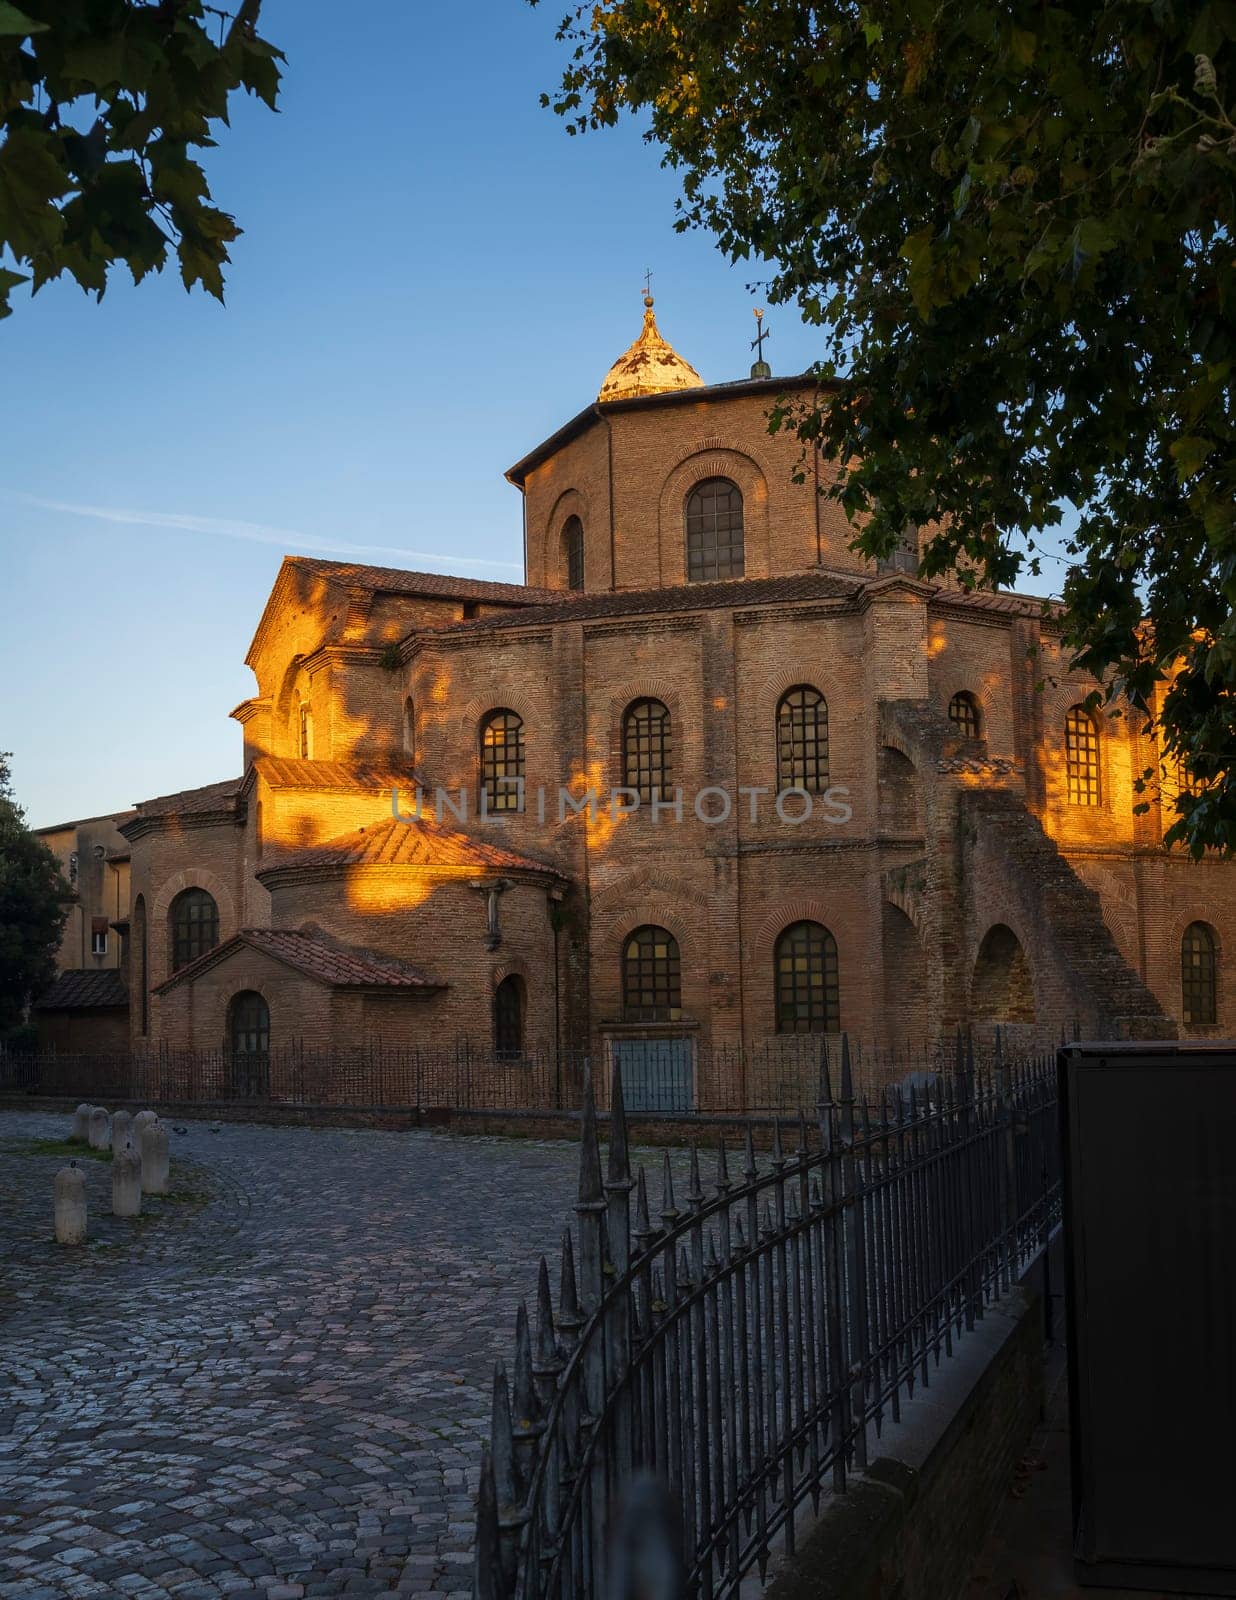 Basilica di San Vitale at morning, one of the most important examples of early Christian Byzantine art in Europe,built in 547, Ravenna, Italy